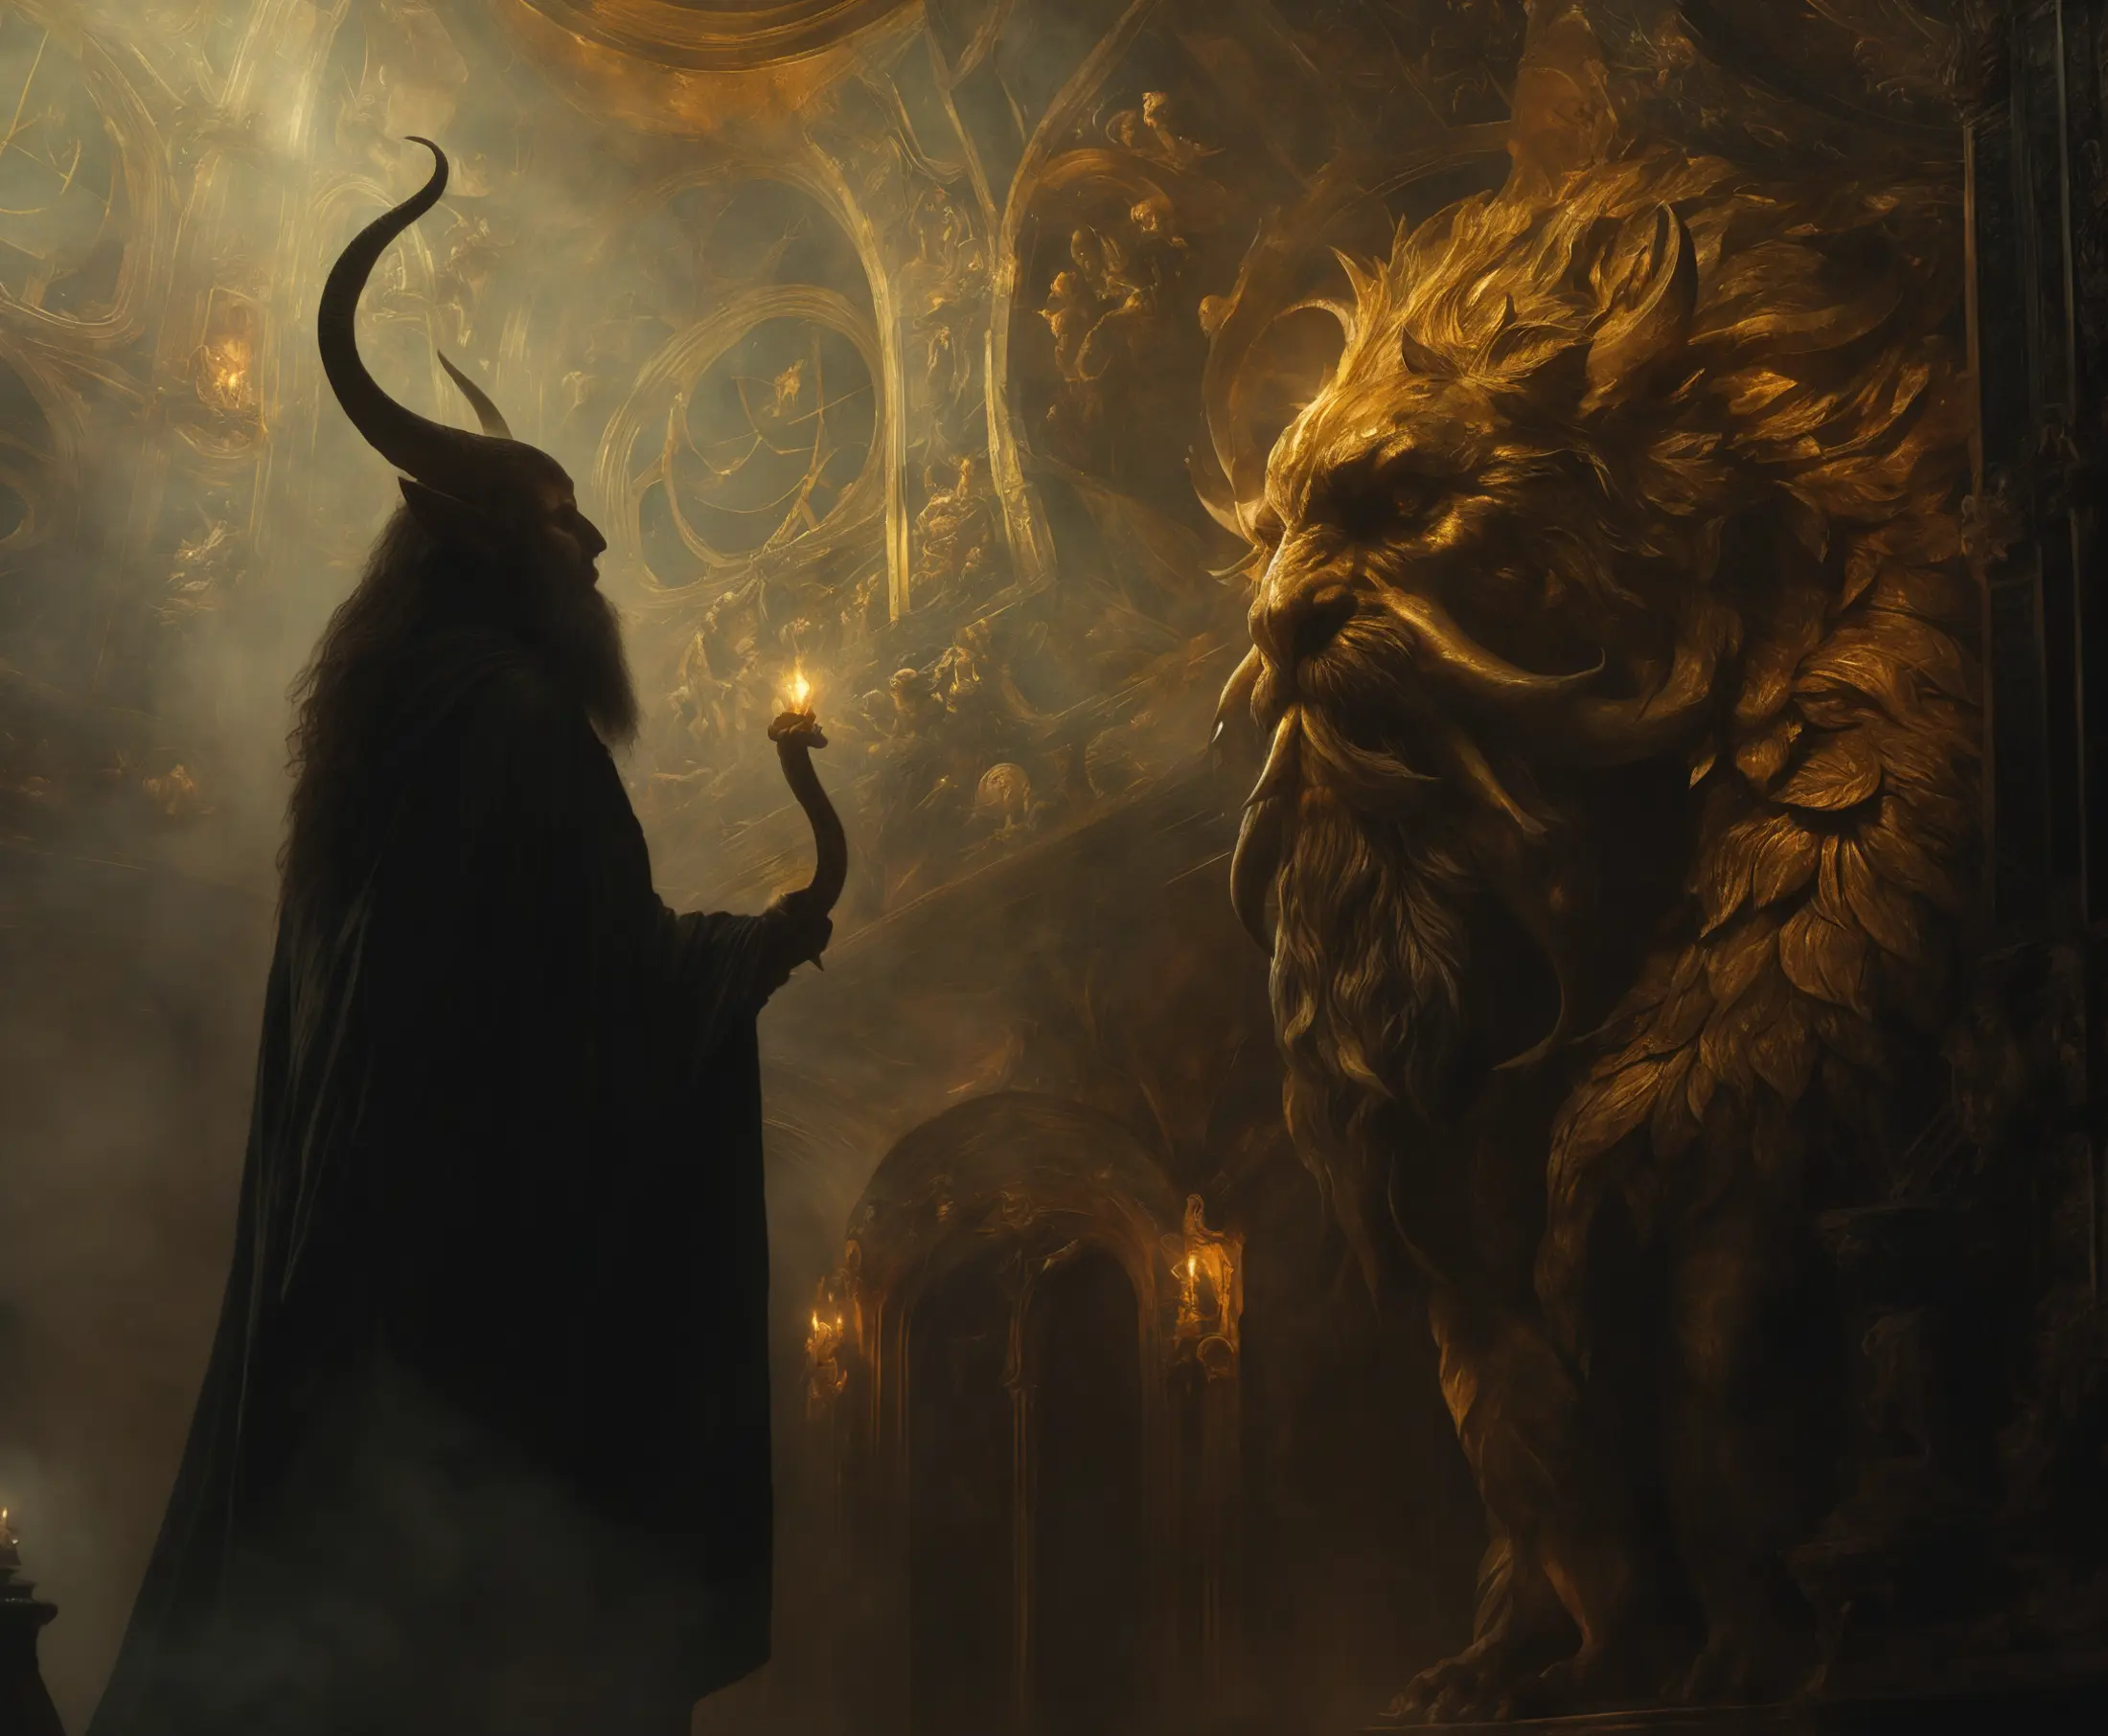 A horned figure with a long beard holds a torch facing a large statue. His hair is long and he is wearing long flowing robes. The statue resembles a lion with an imposing mane and scales on its body. The scene is set in a dimly lit, grand hall filled with ornate designs swirling in the background. 